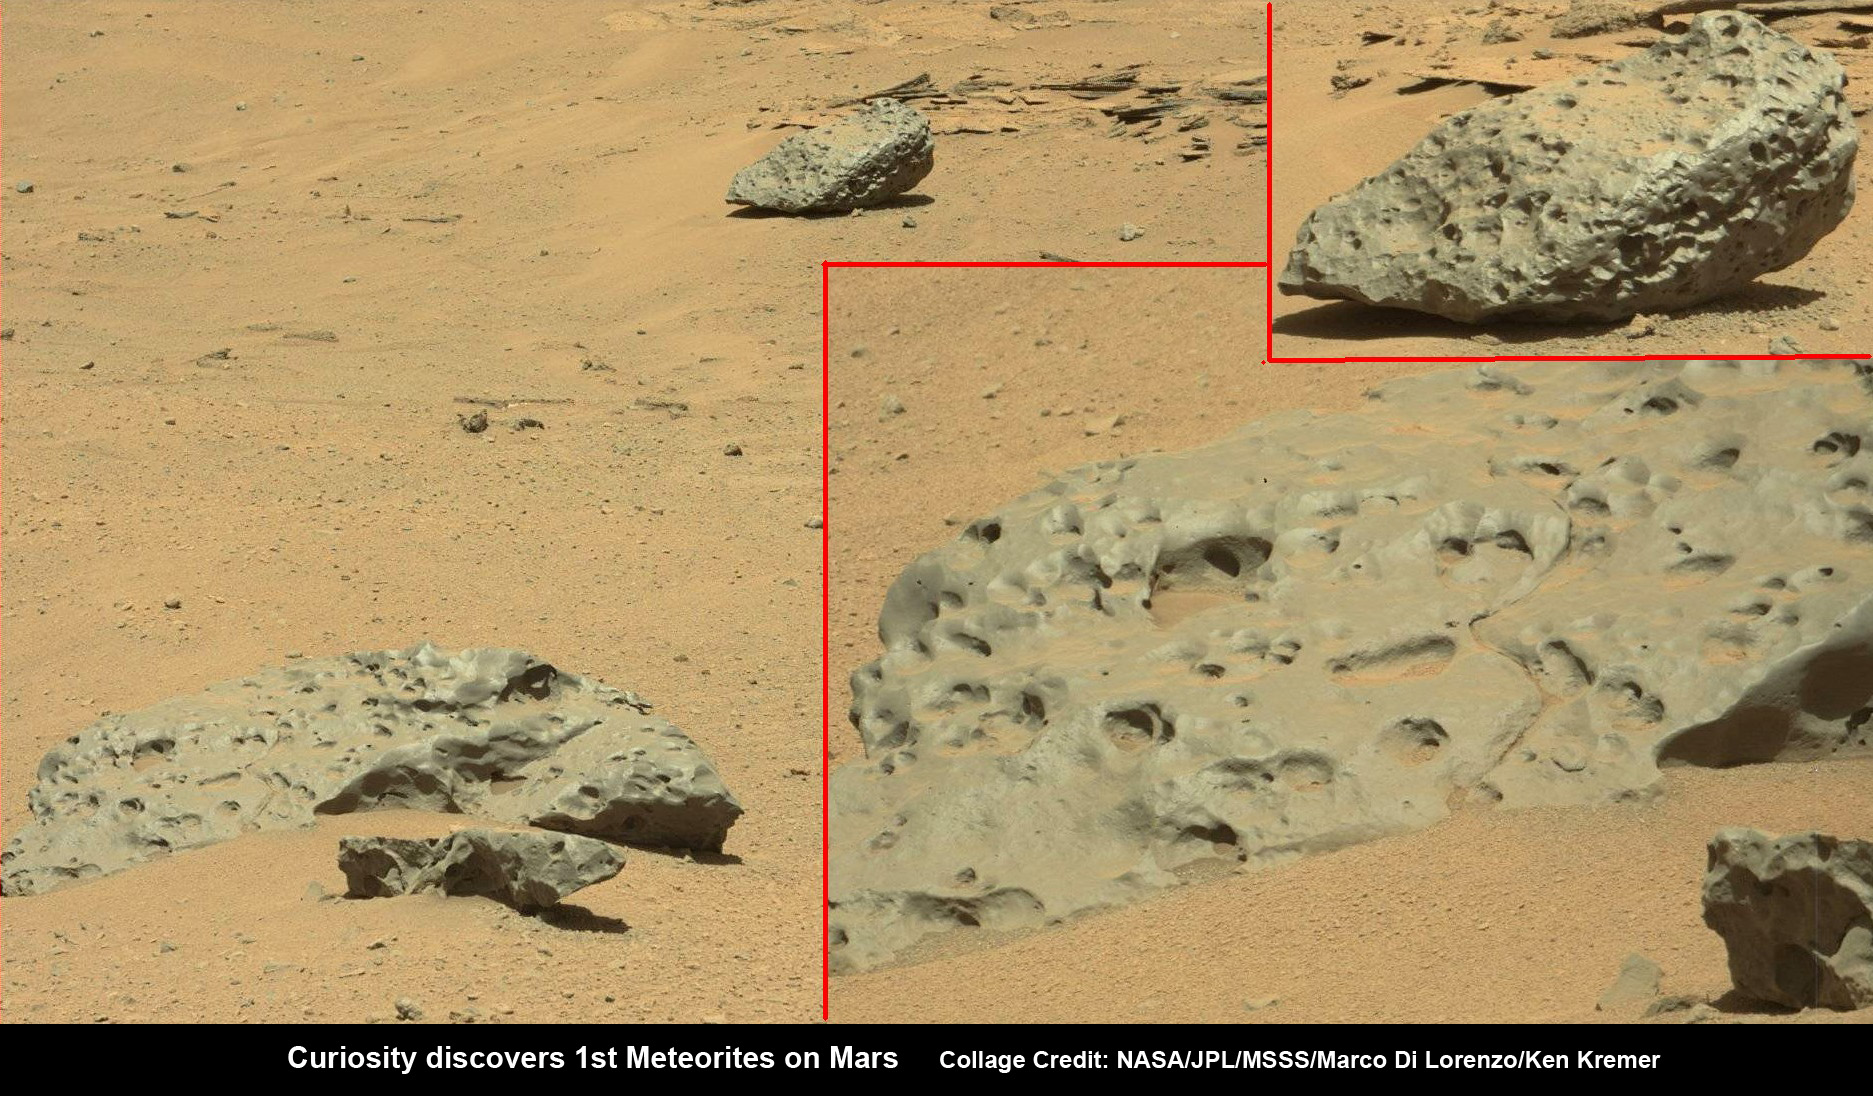 Collage of Mastcam camera images shows the 1st meteorites discovered on Mars by the Curiosity rover and captured on Sol 641, May 26, 2014. Collage Credit: NASA/JPL-Caltech/MSSS/Marco Di Lorenzo/Ken Kremer